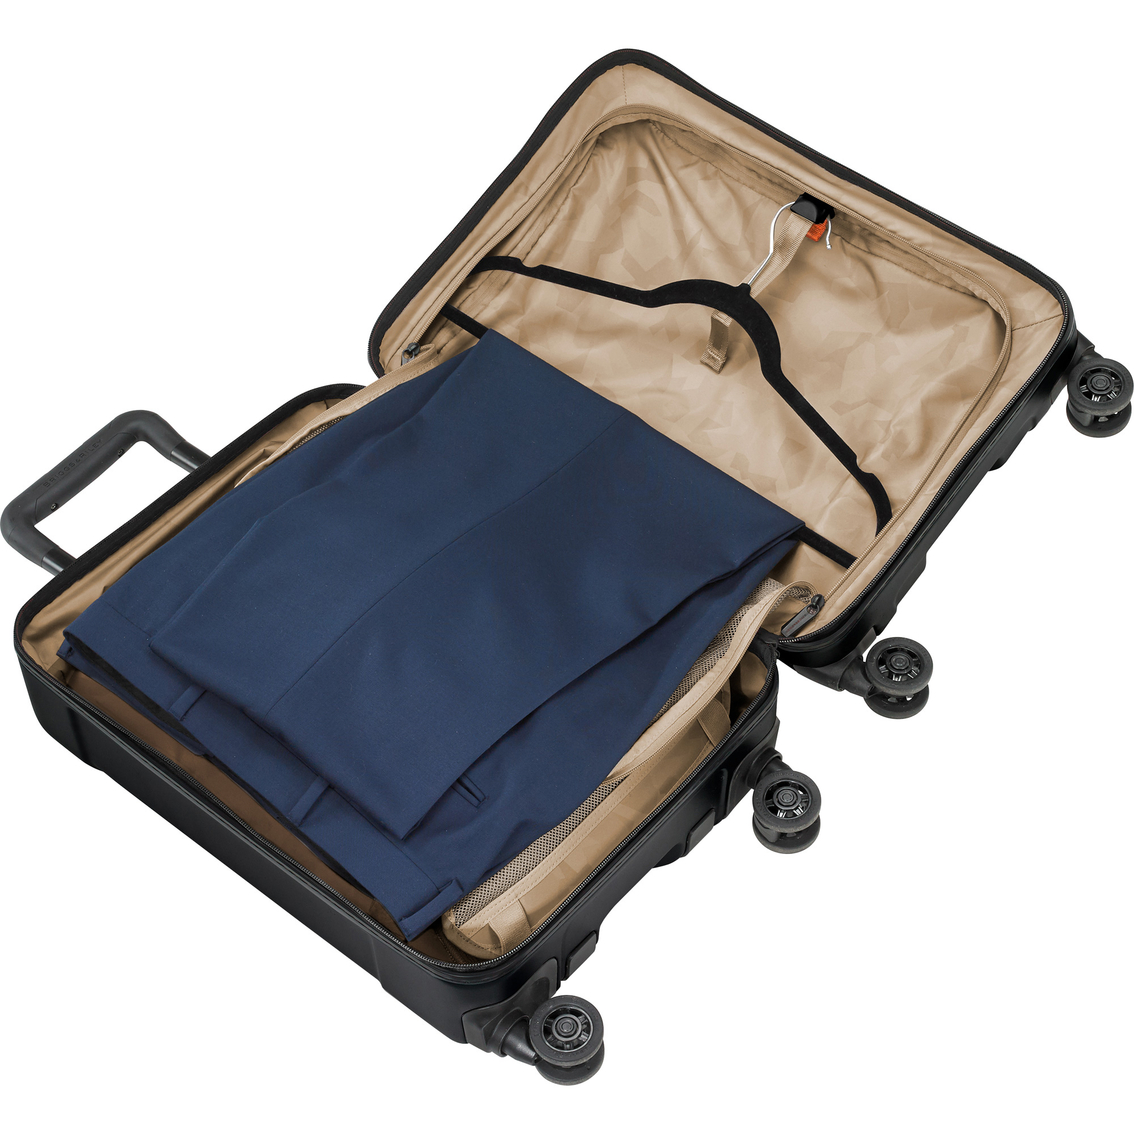 Briggs & Riley International Torq 21 in. Stealth Carry-On Spinner - Image 7 of 10